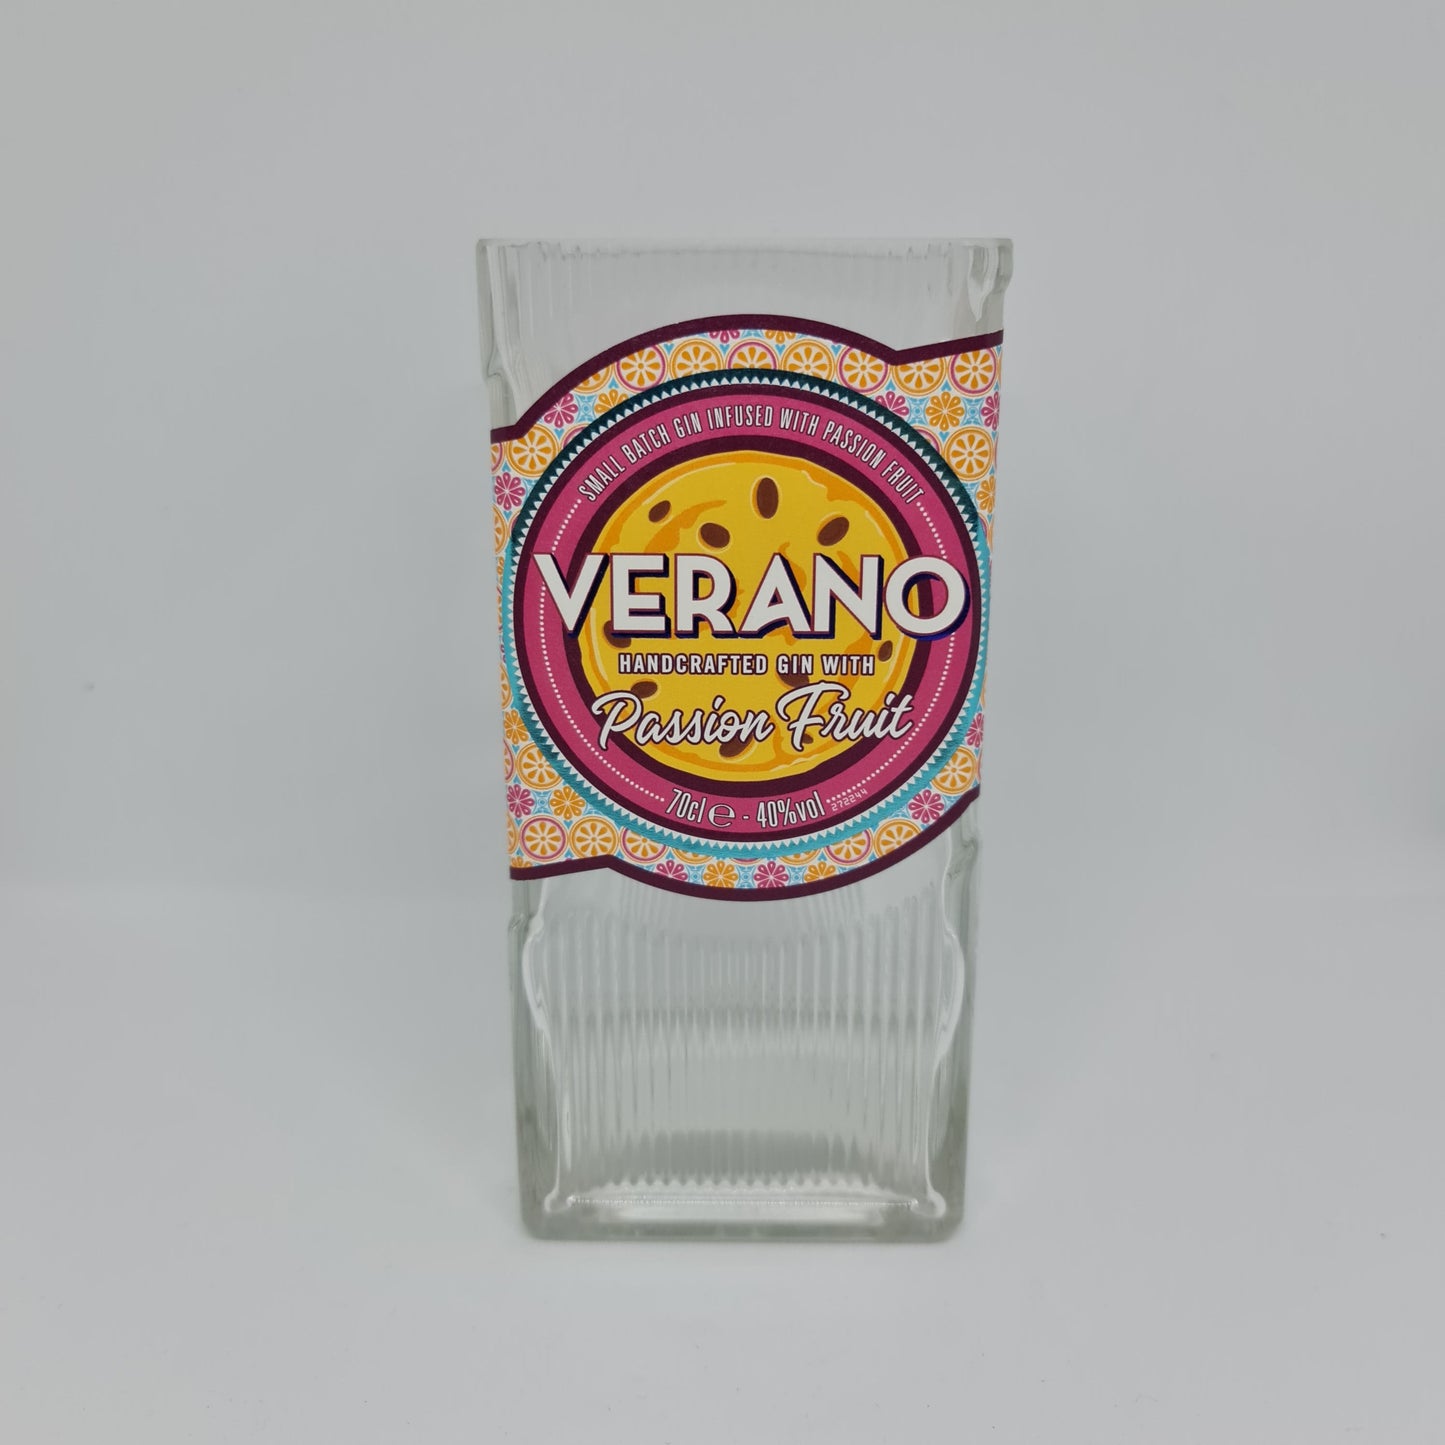 Verano Passion Fruit Gin Bottle Candle